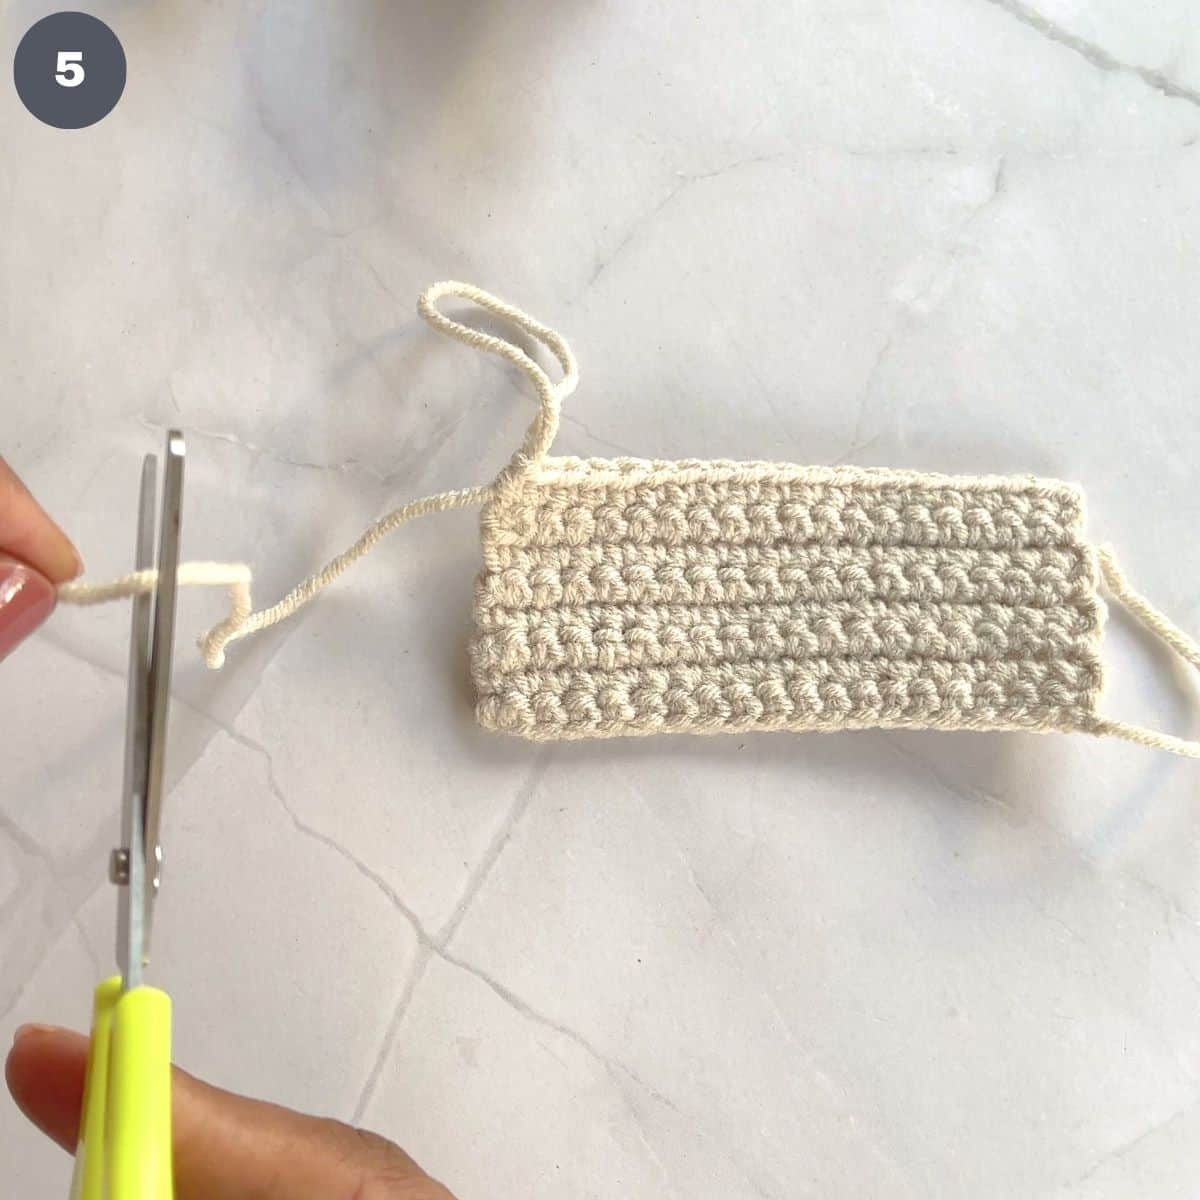 Cutting excess yarn with a pair of scissors.